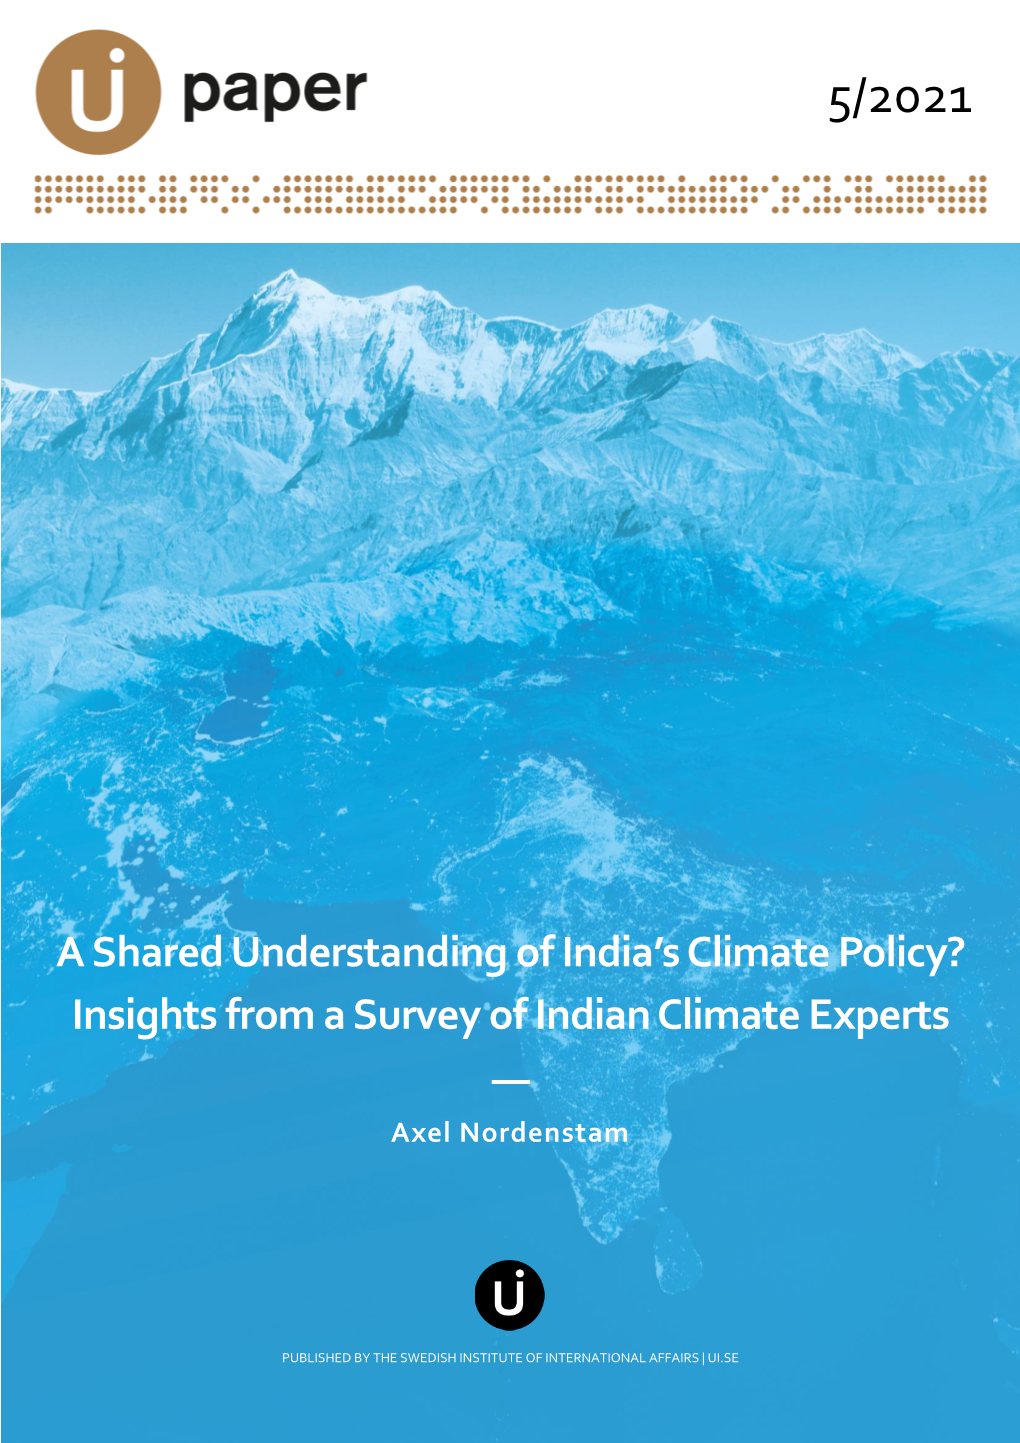 Insights from a Survey of Indian Climate Experts — Axel Nordenstam